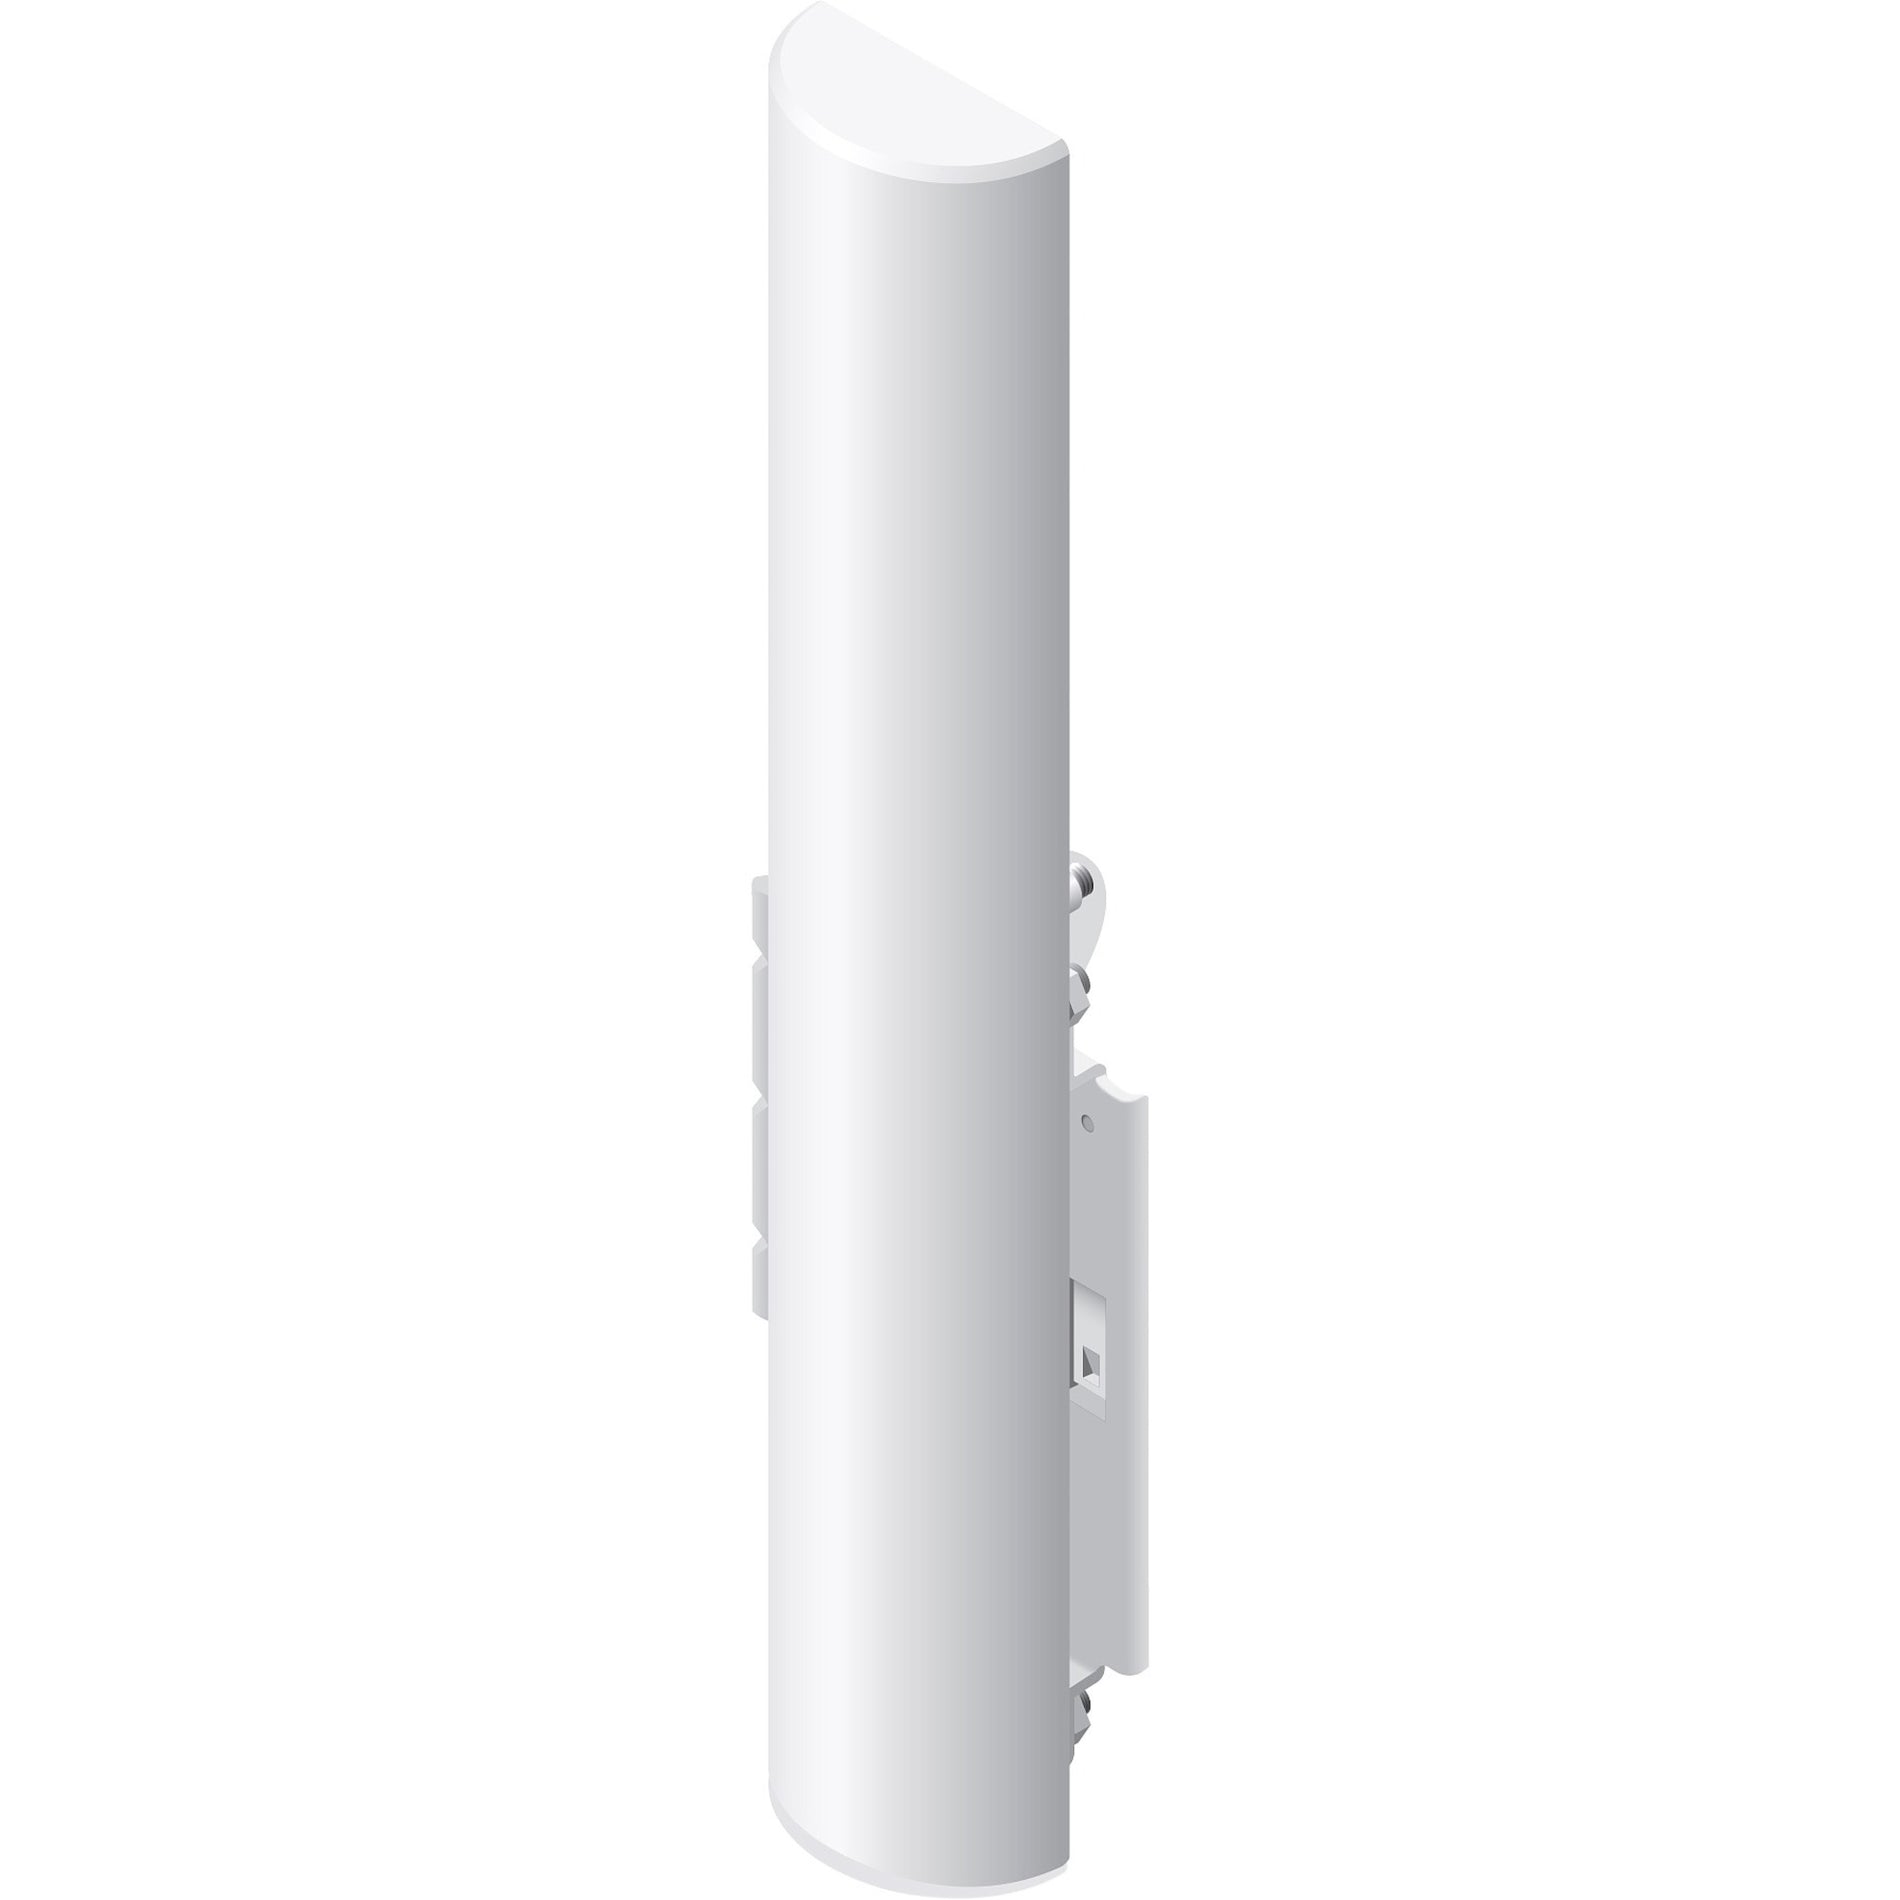 Ubiquiti AM-5G16-120 2x2 MIMO BaseStation Sector Antenna, High Performance Wireless Coverage